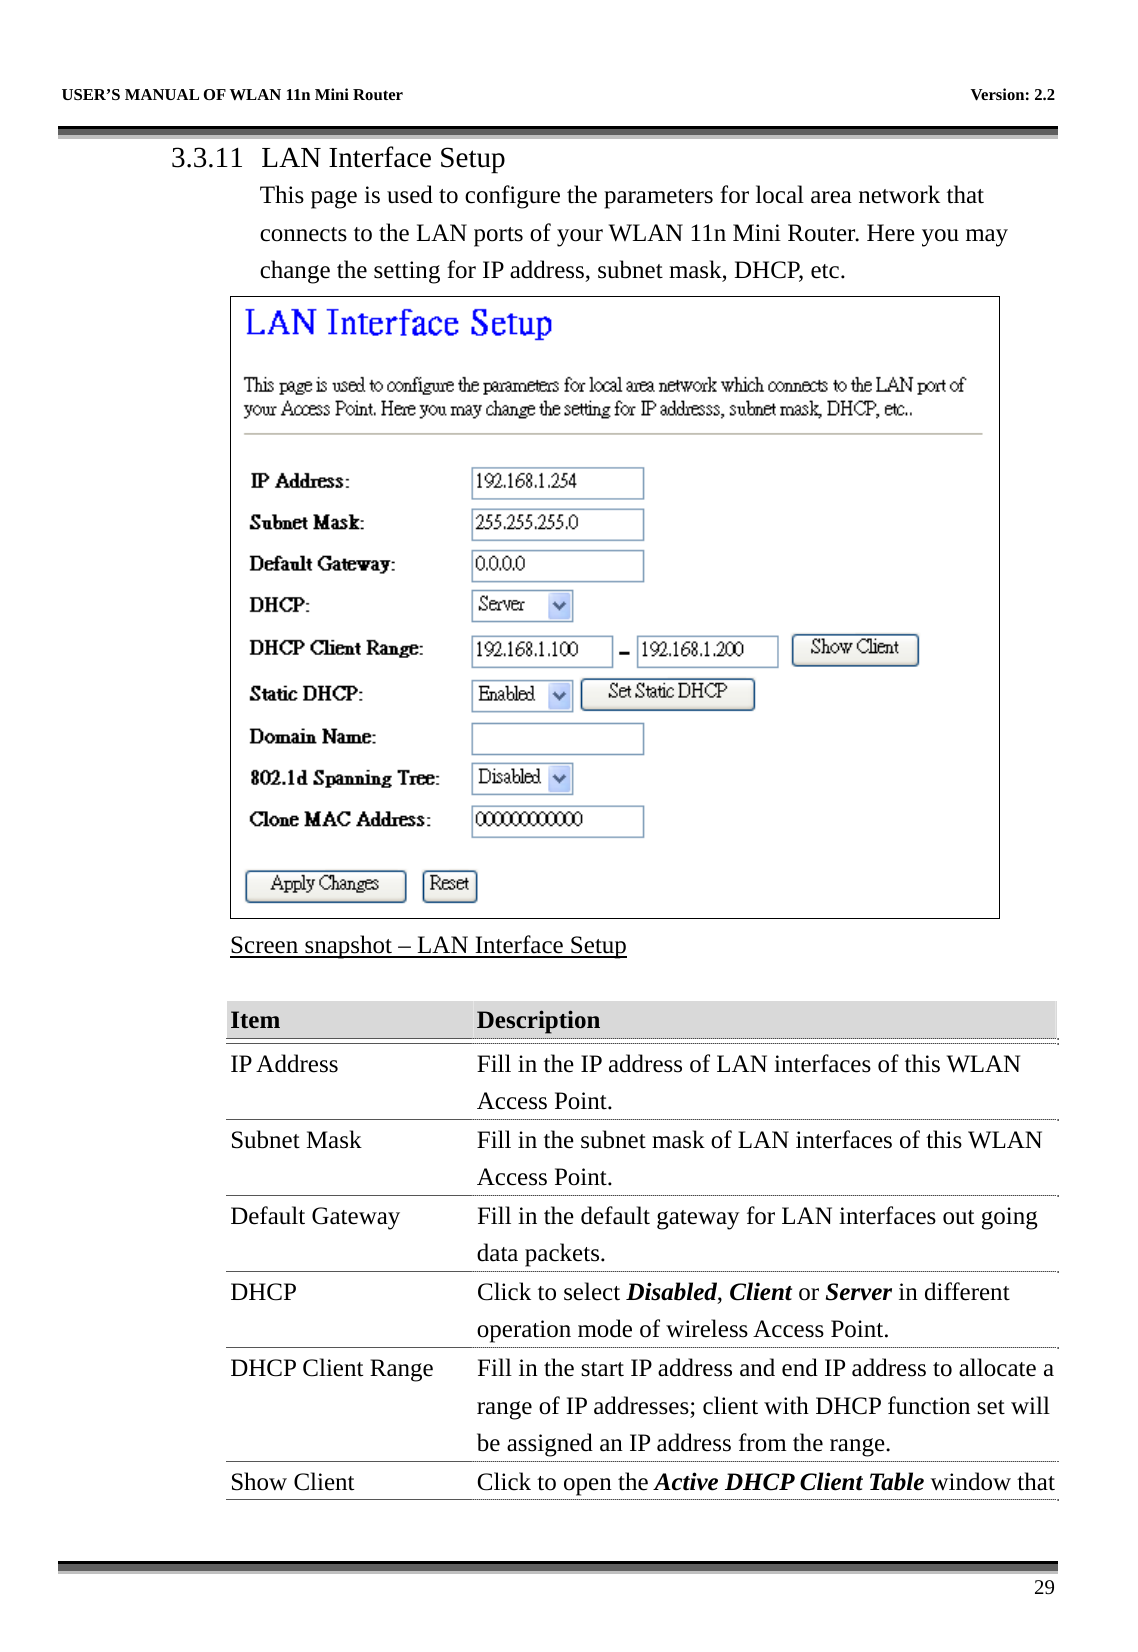   USER’S MANUAL OF WLAN 11n Mini Router    Version: 2.2      29 3.3.11  LAN Interface Setup This page is used to configure the parameters for local area network that connects to the LAN ports of your WLAN 11n Mini Router. Here you may change the setting for IP address, subnet mask, DHCP, etc.  Screen snapshot – LAN Interface Setup  Item  Description   IP Address  Fill in the IP address of LAN interfaces of this WLAN Access Point. Subnet Mask  Fill in the subnet mask of LAN interfaces of this WLAN Access Point. Default Gateway  Fill in the default gateway for LAN interfaces out going data packets. DHCP  Click to select Disabled, Client or Server in different operation mode of wireless Access Point. DHCP Client Range  Fill in the start IP address and end IP address to allocate a range of IP addresses; client with DHCP function set will be assigned an IP address from the range. Show Client  Click to open the Active DHCP Client Table window that 